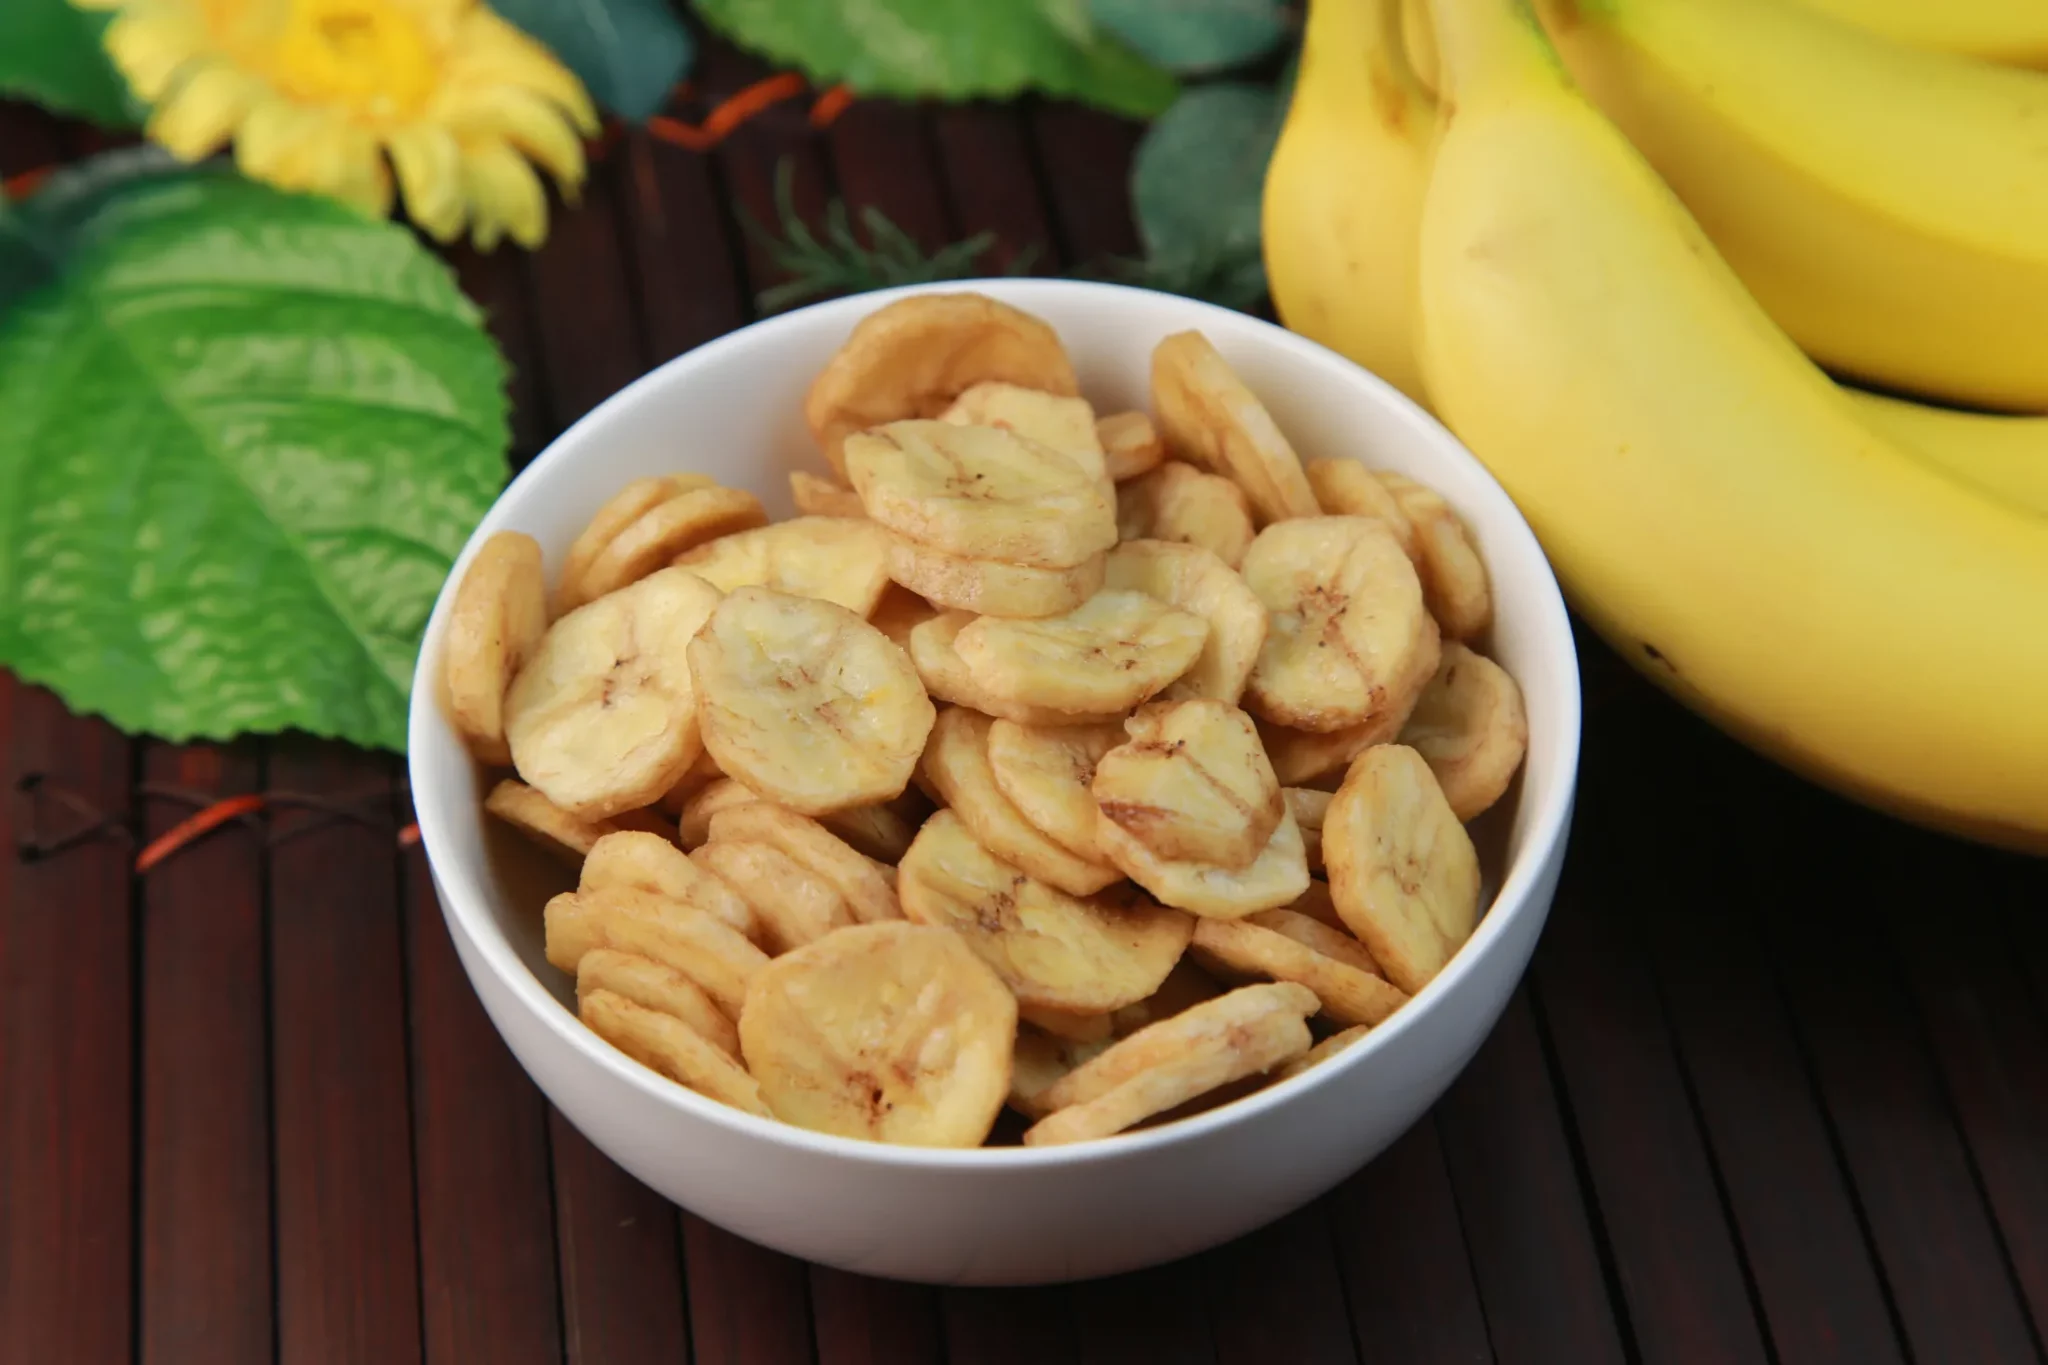 A bowl of banana chips on a wooden table accompanied by fresh bananas, a popular tropical snack in the Seychelles.